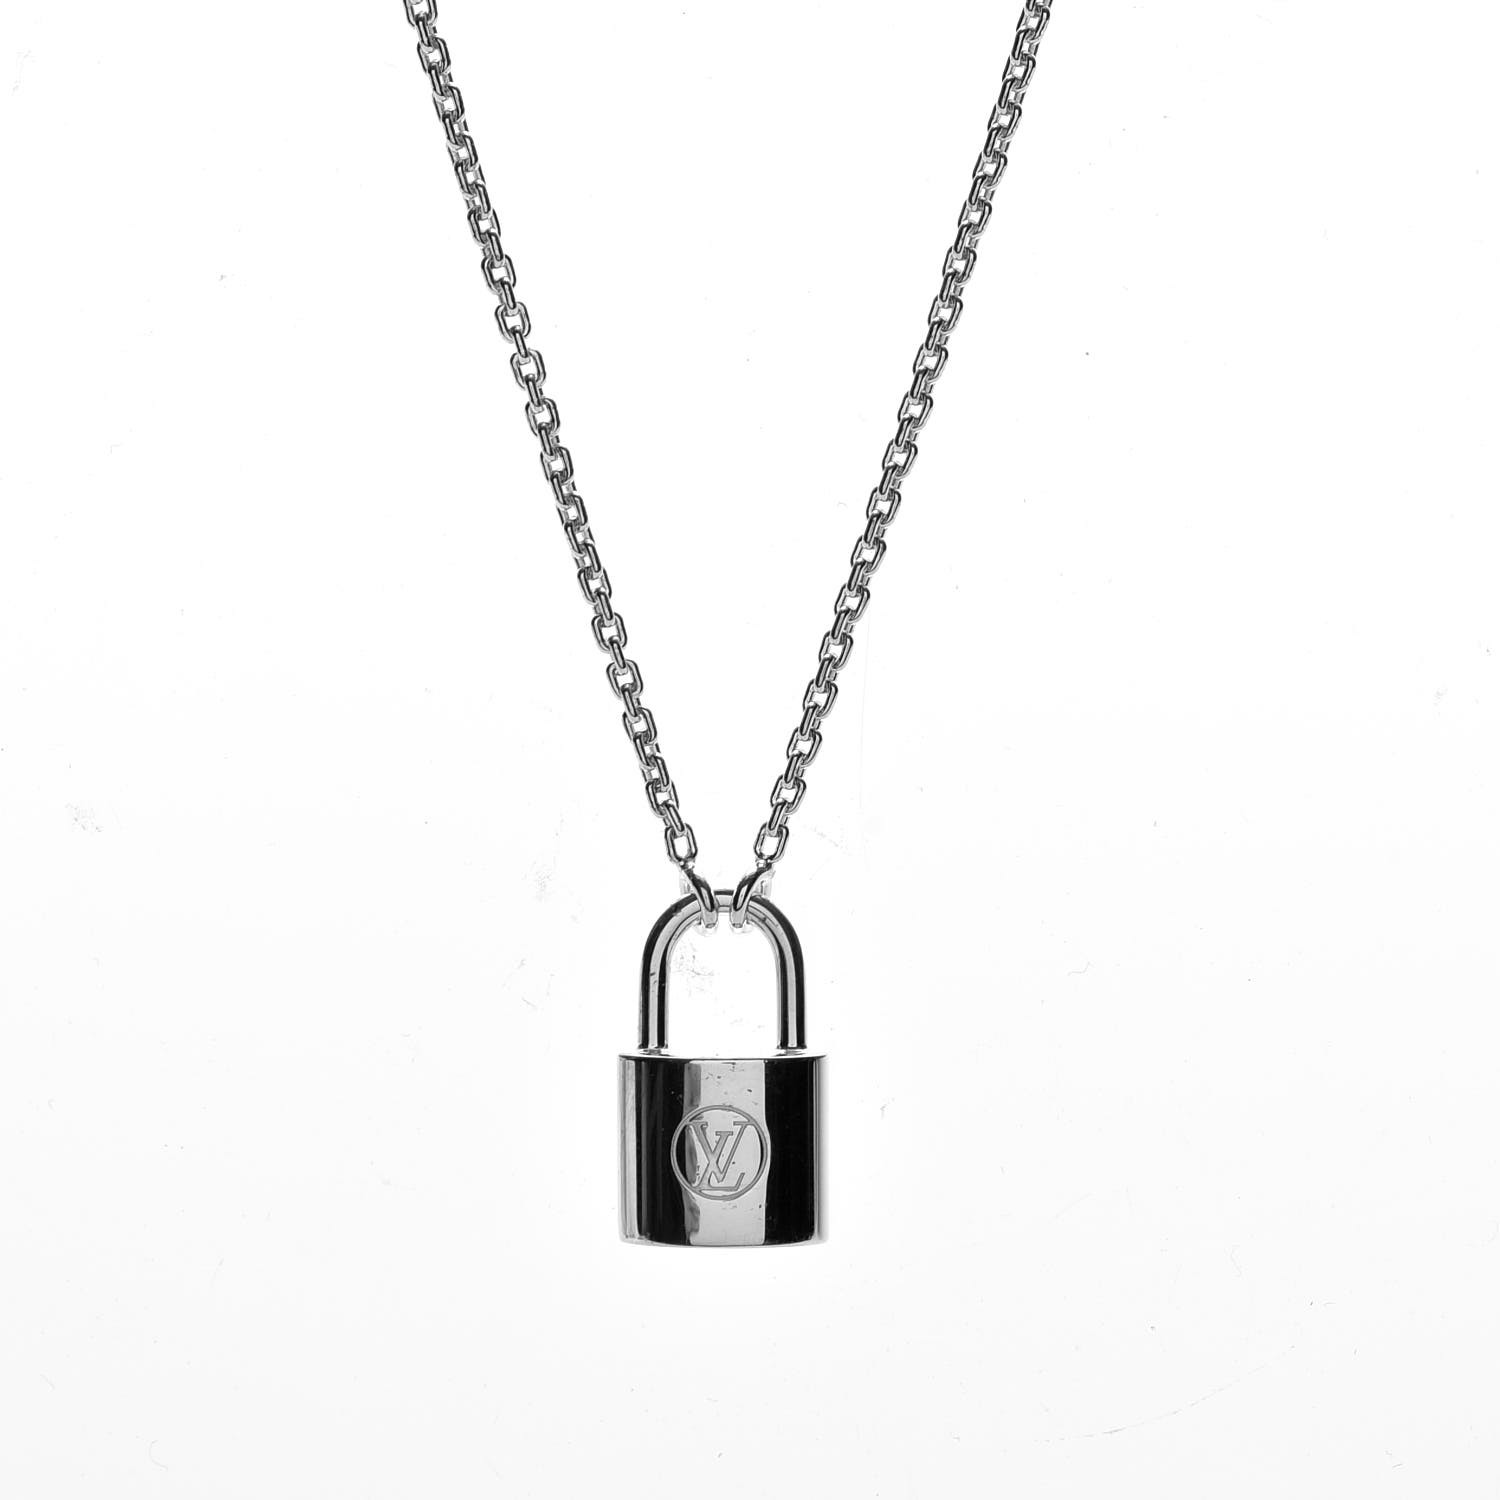 LOUIS VUITTON Sterling Silver Lockit Necklace 224061